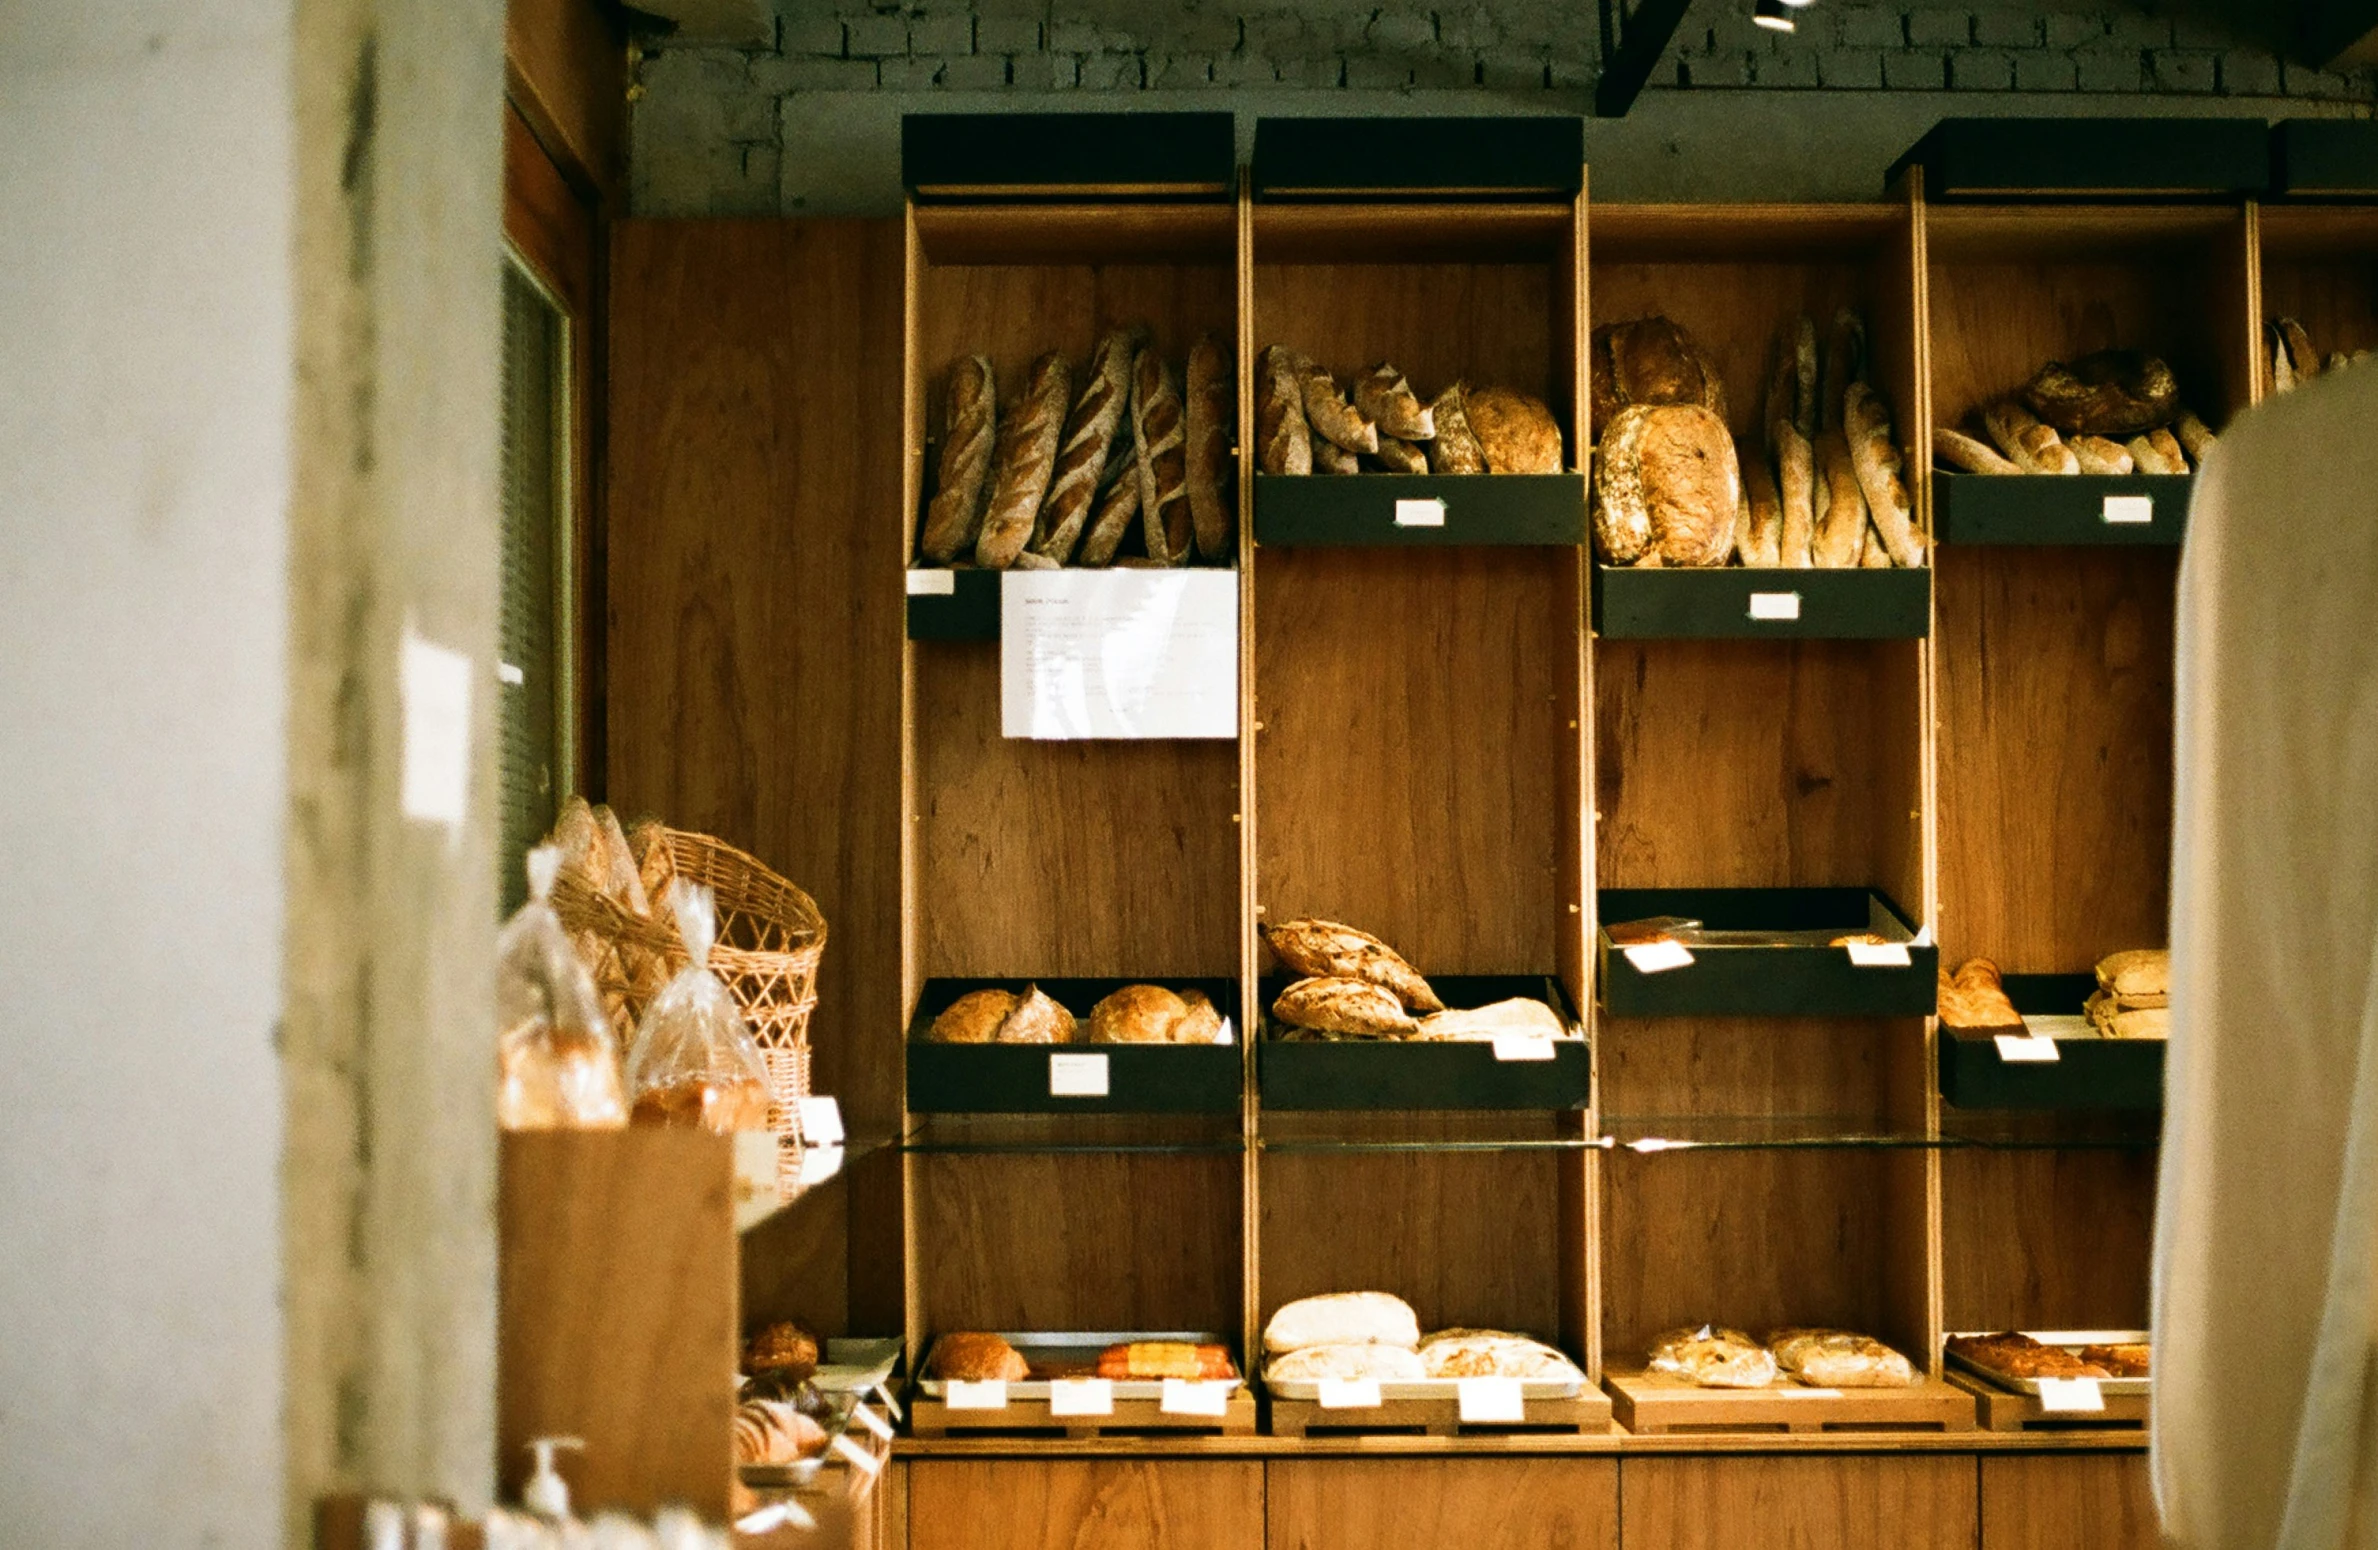 the bakery is filled with many fresh baked goods